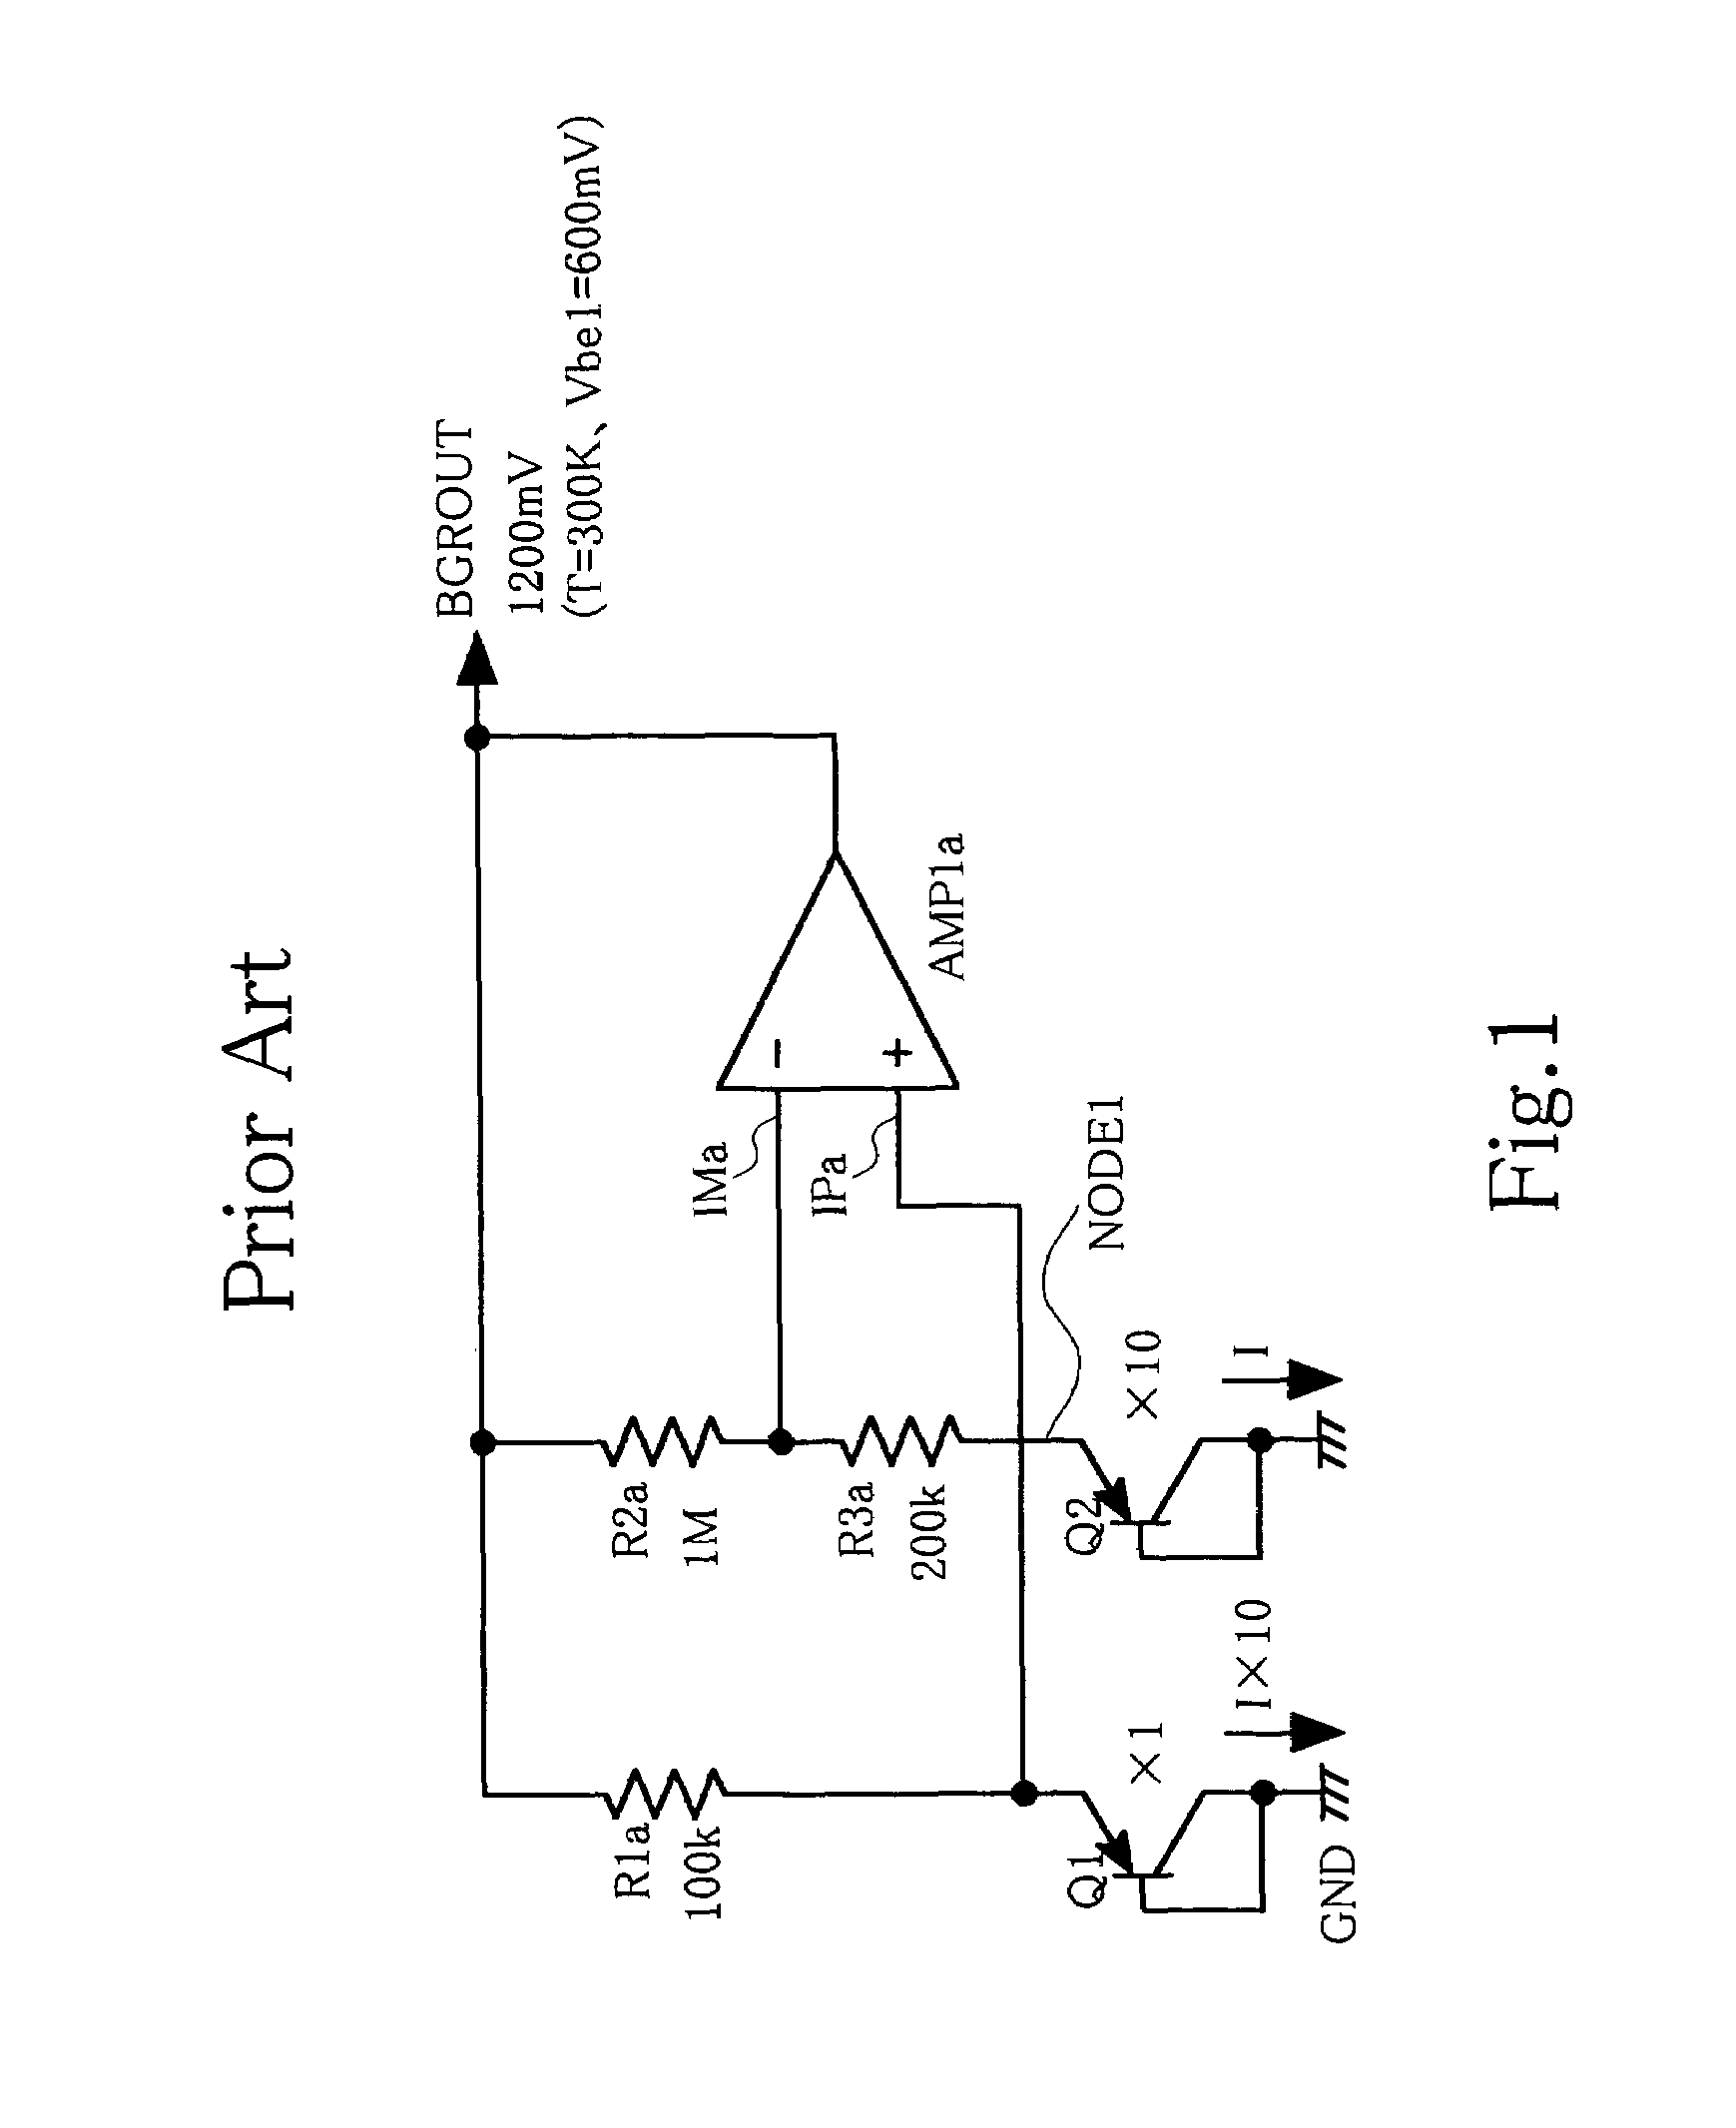 Reference voltage generation circuit